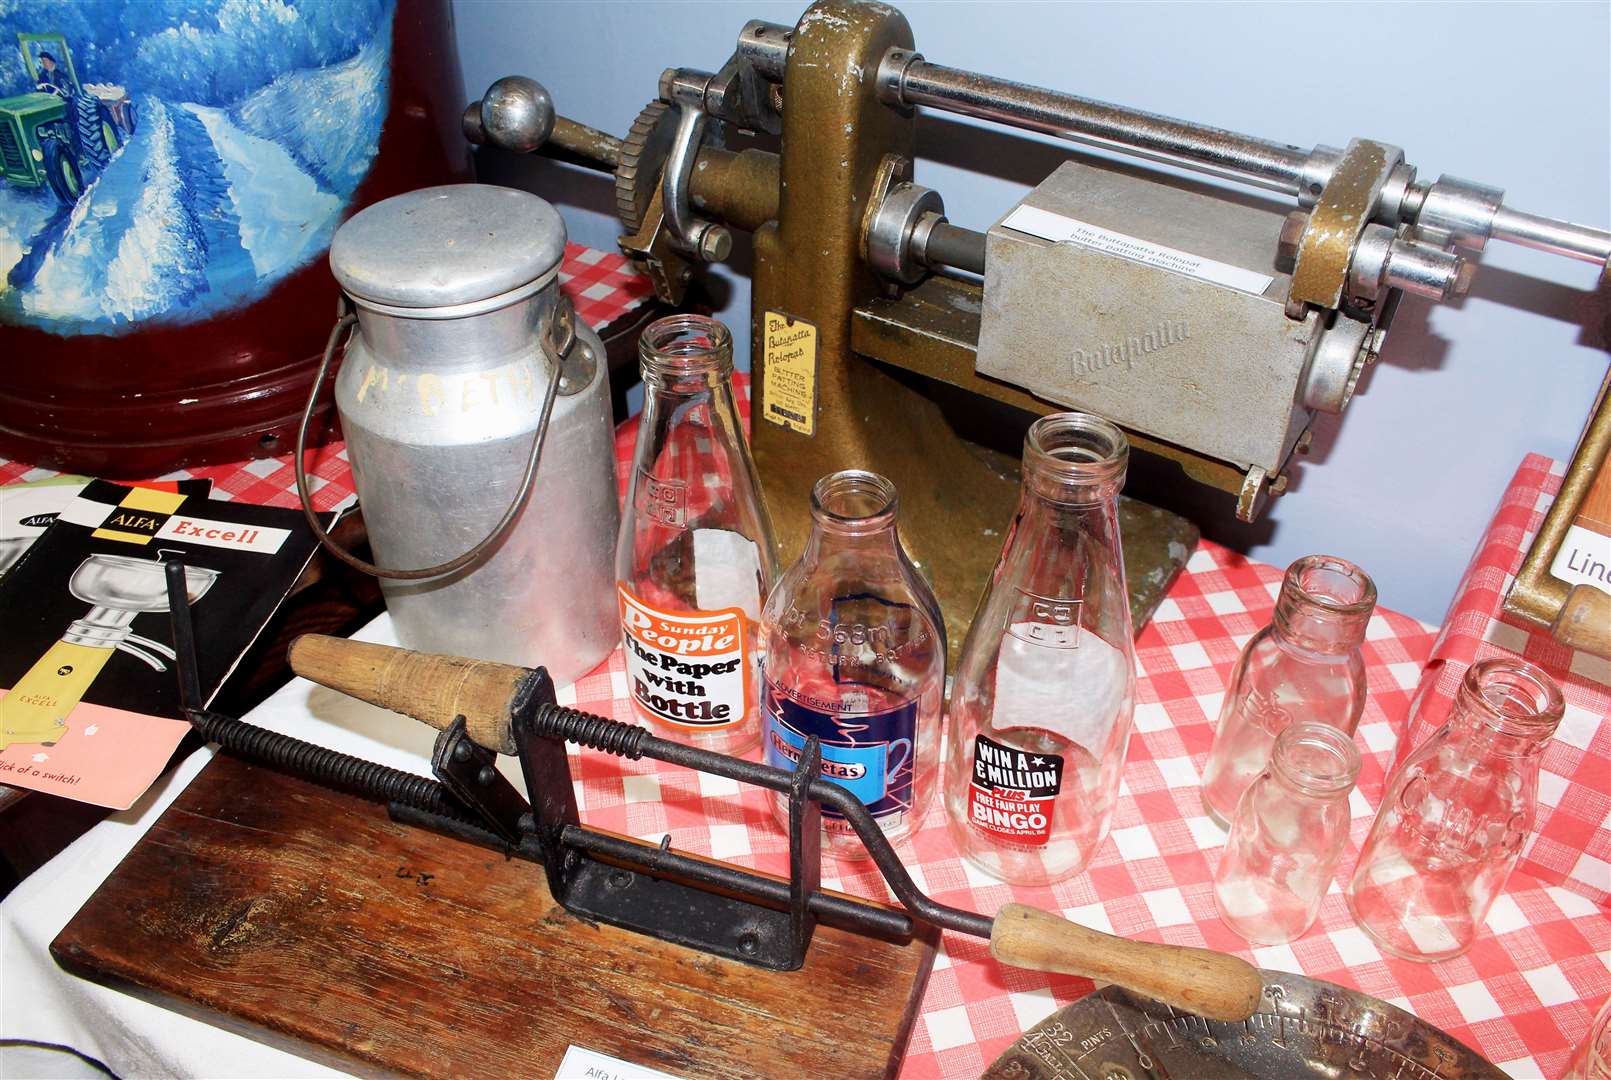 Milk bottles and other dairy-related items on display. Picture: Alan Hendry